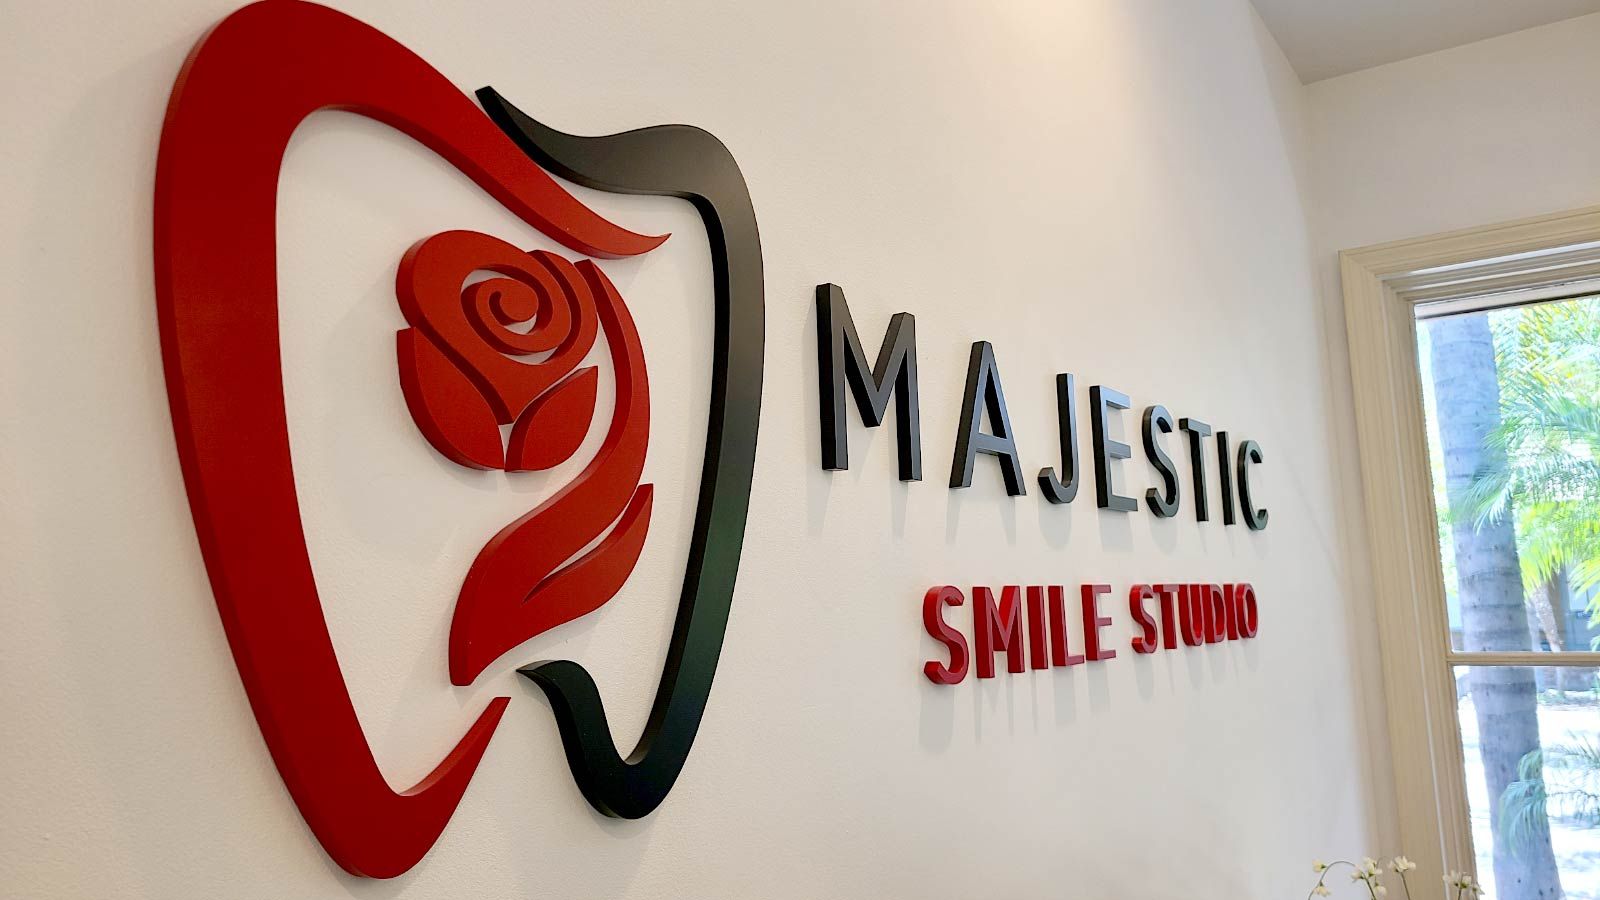 Majestic Smile Studio office sign mounted to the wall